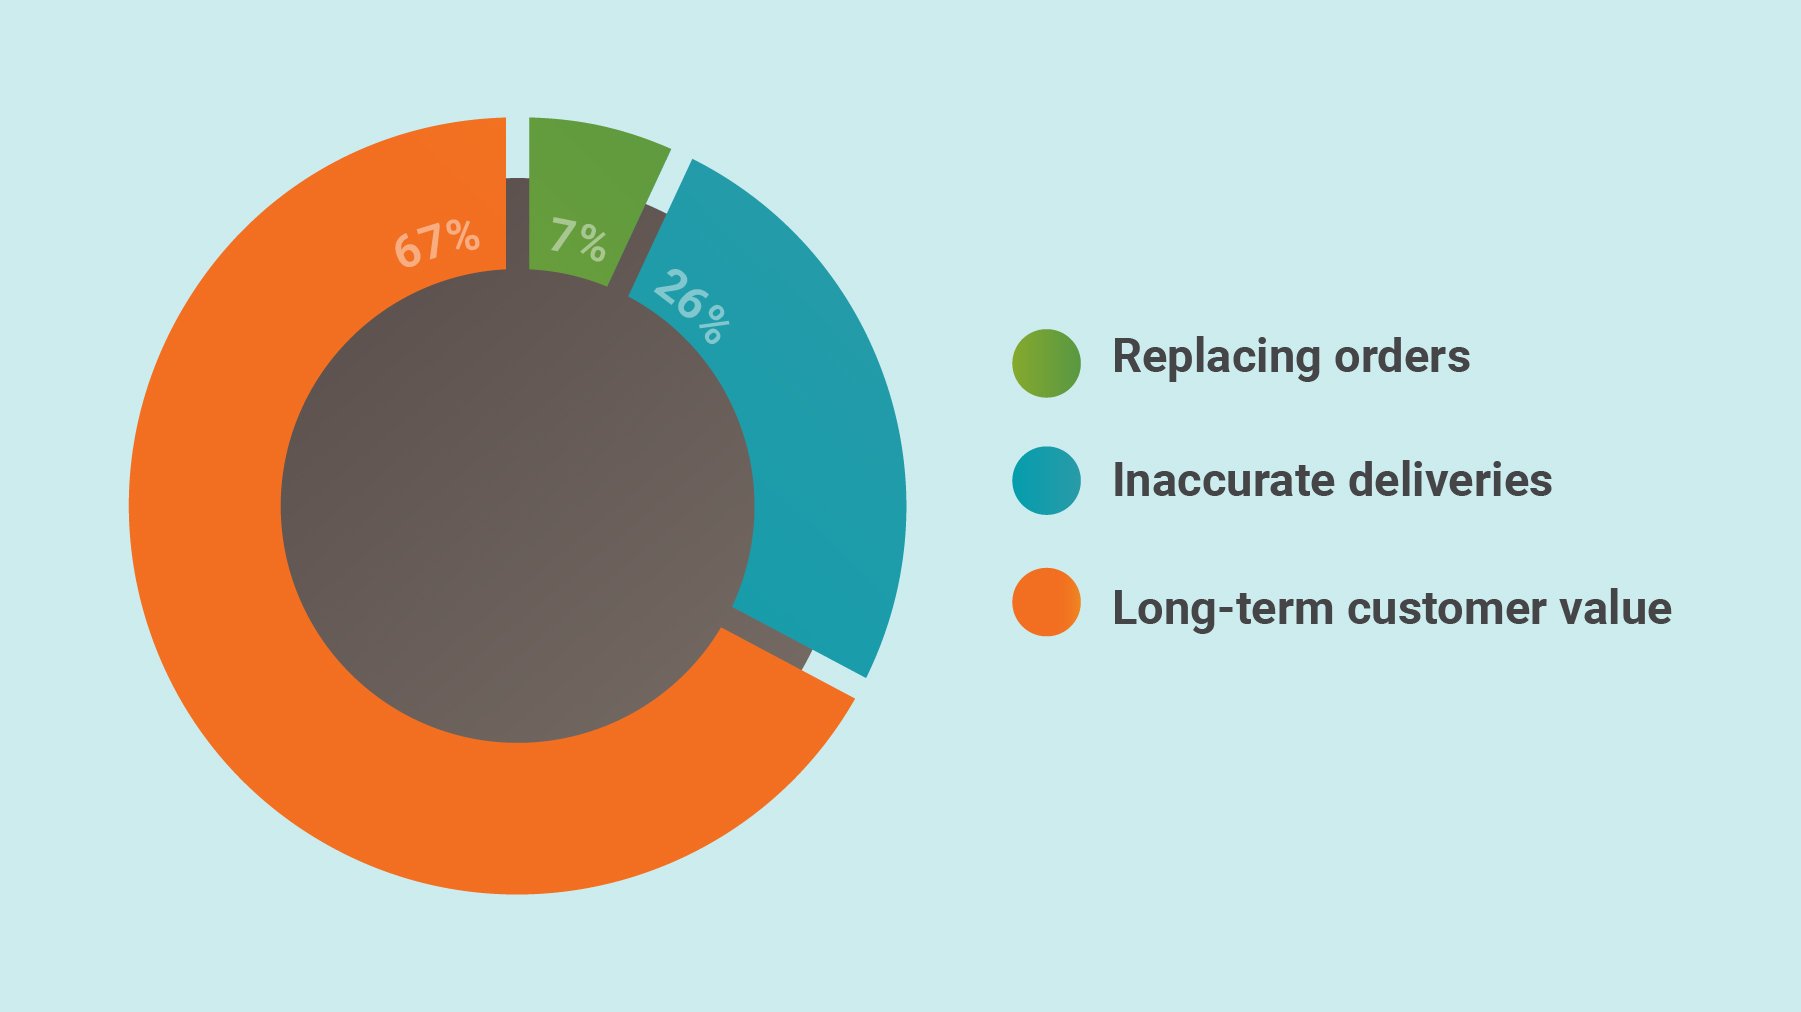 A pie chart showing the cost cost of inaccuracy for brands. 